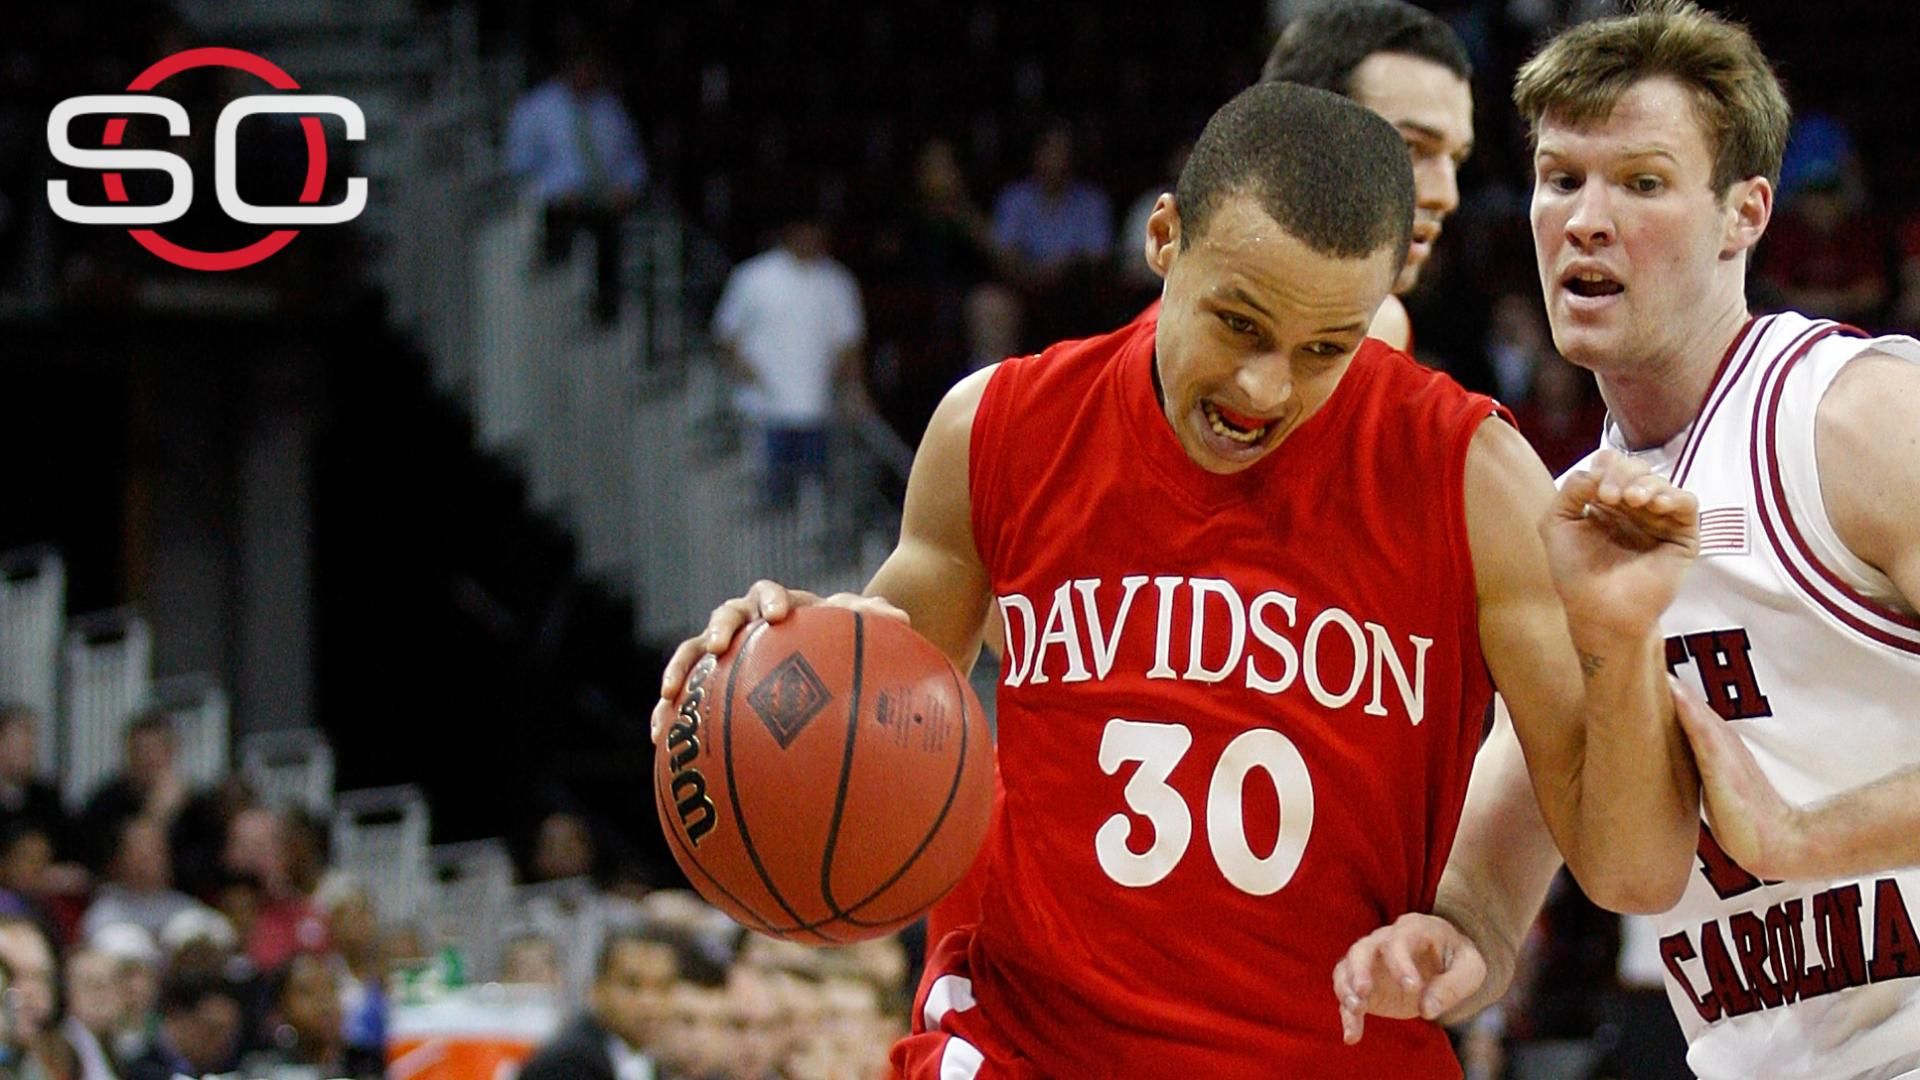 Steph Curry's College Jersey Won't be Retired Until He Graduates